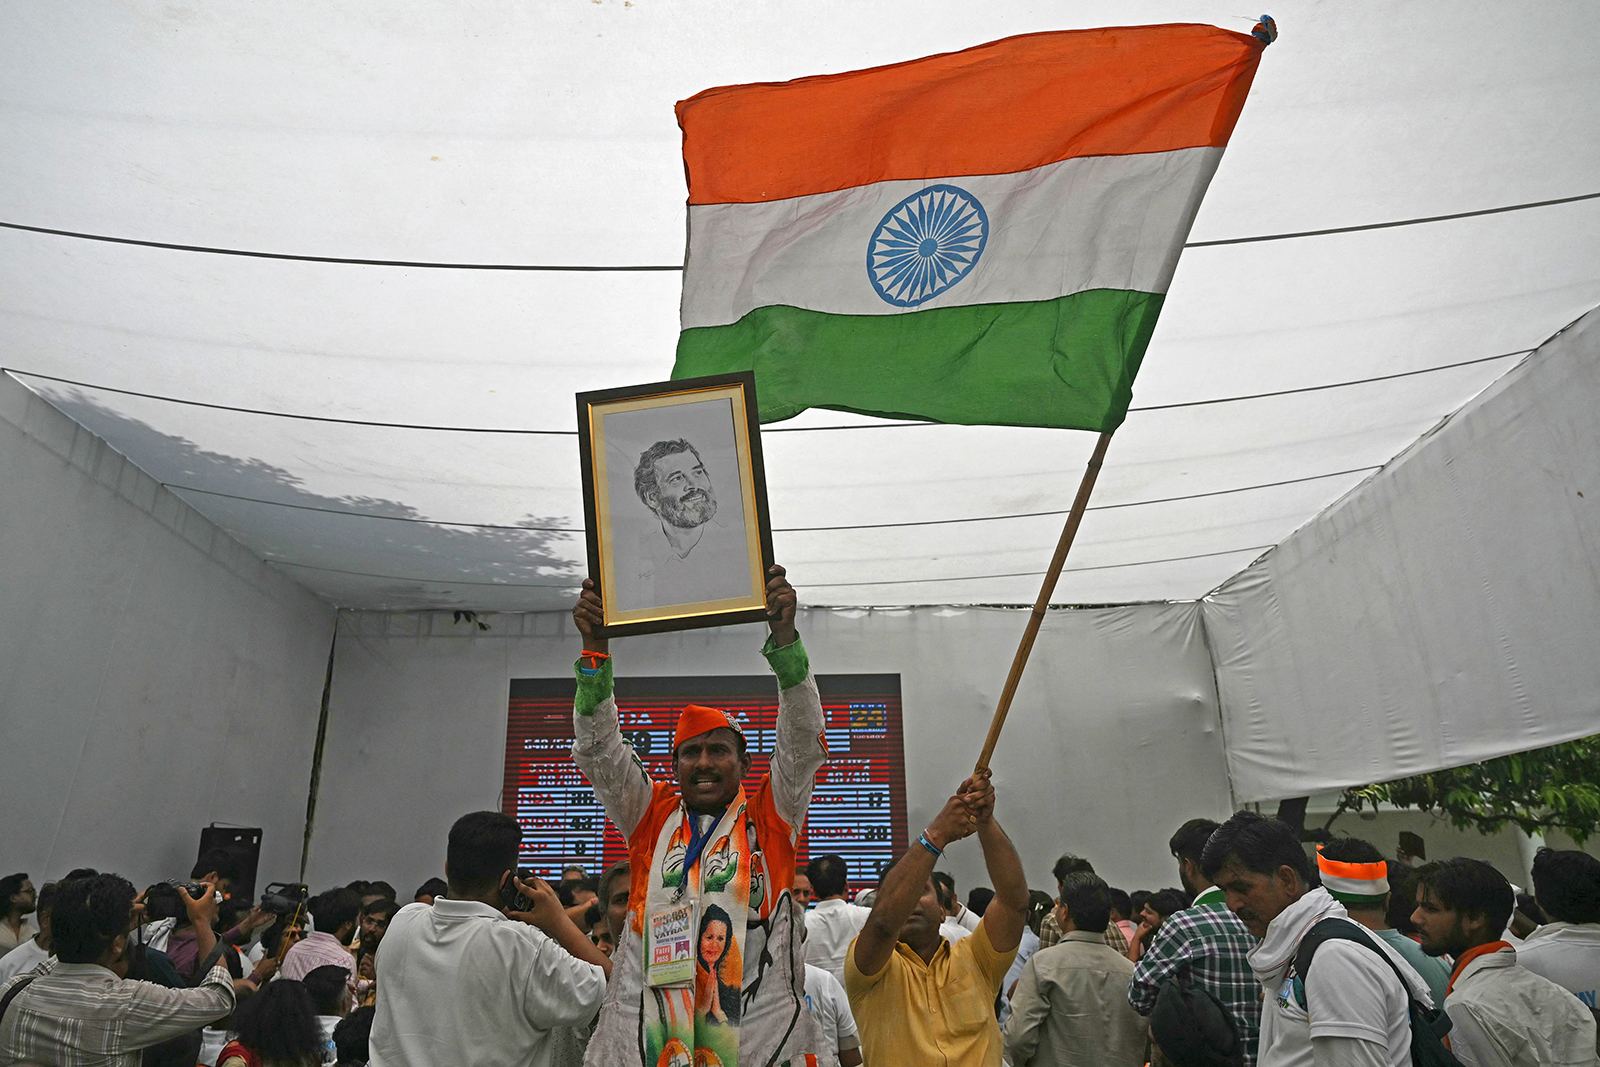 A supporter of Indian National Congress (INC) party waves a national flag at the INC headquarter in New Delhi on June 4.